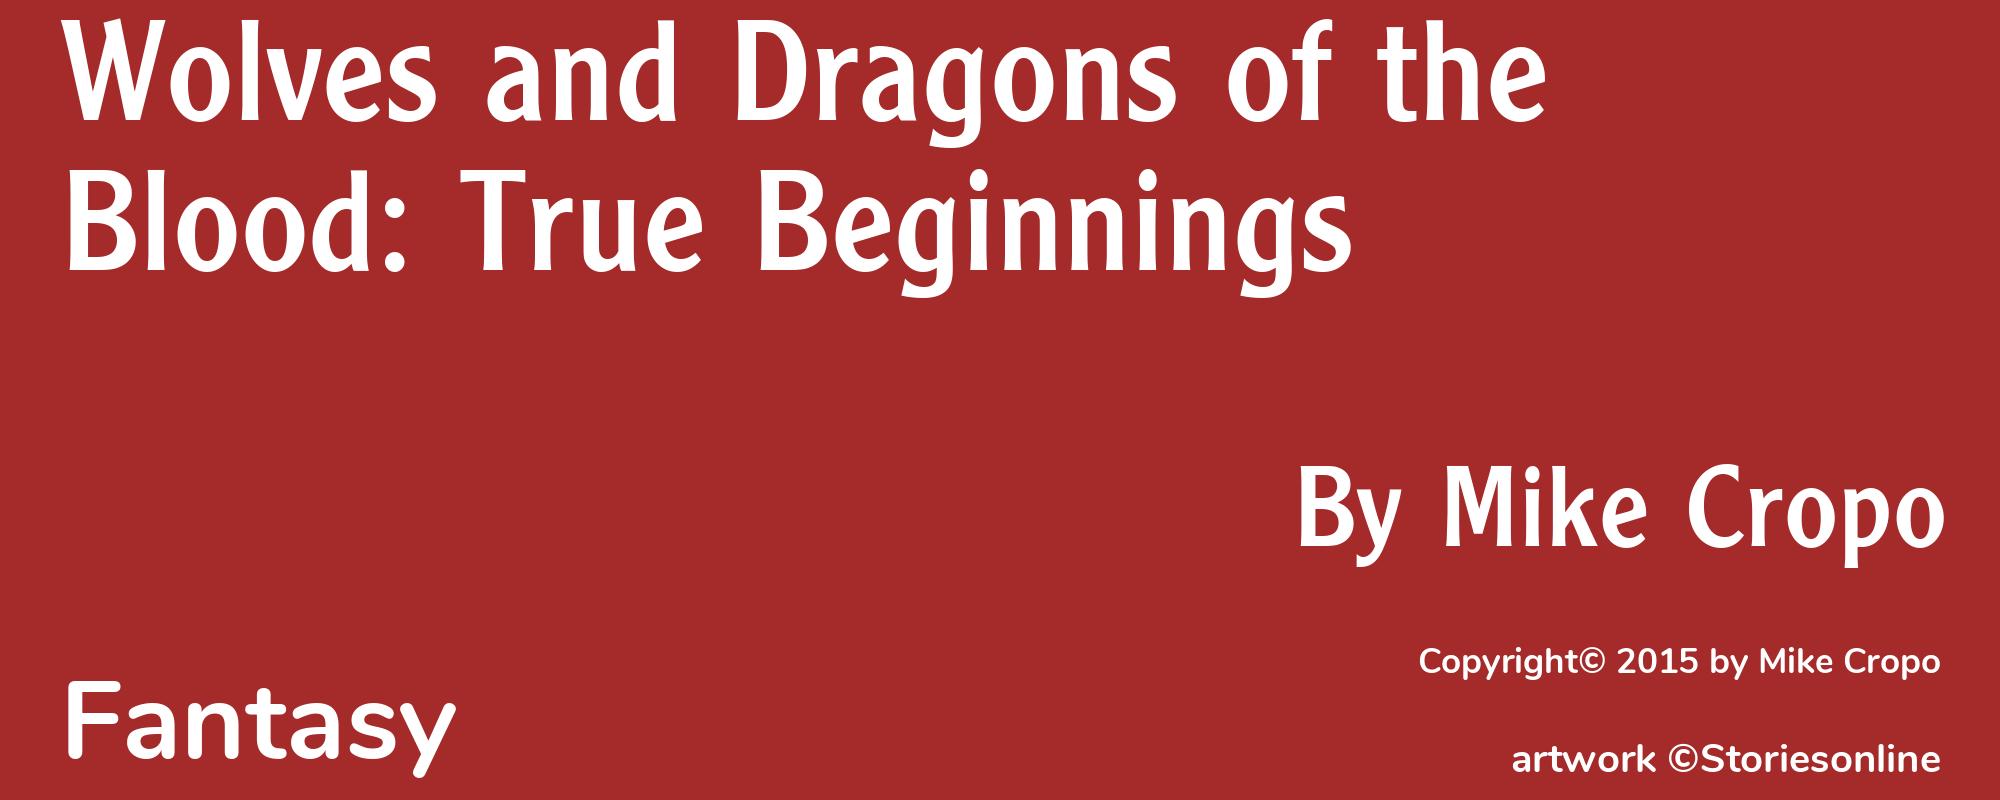 Wolves and Dragons of the Blood: True Beginnings - Cover